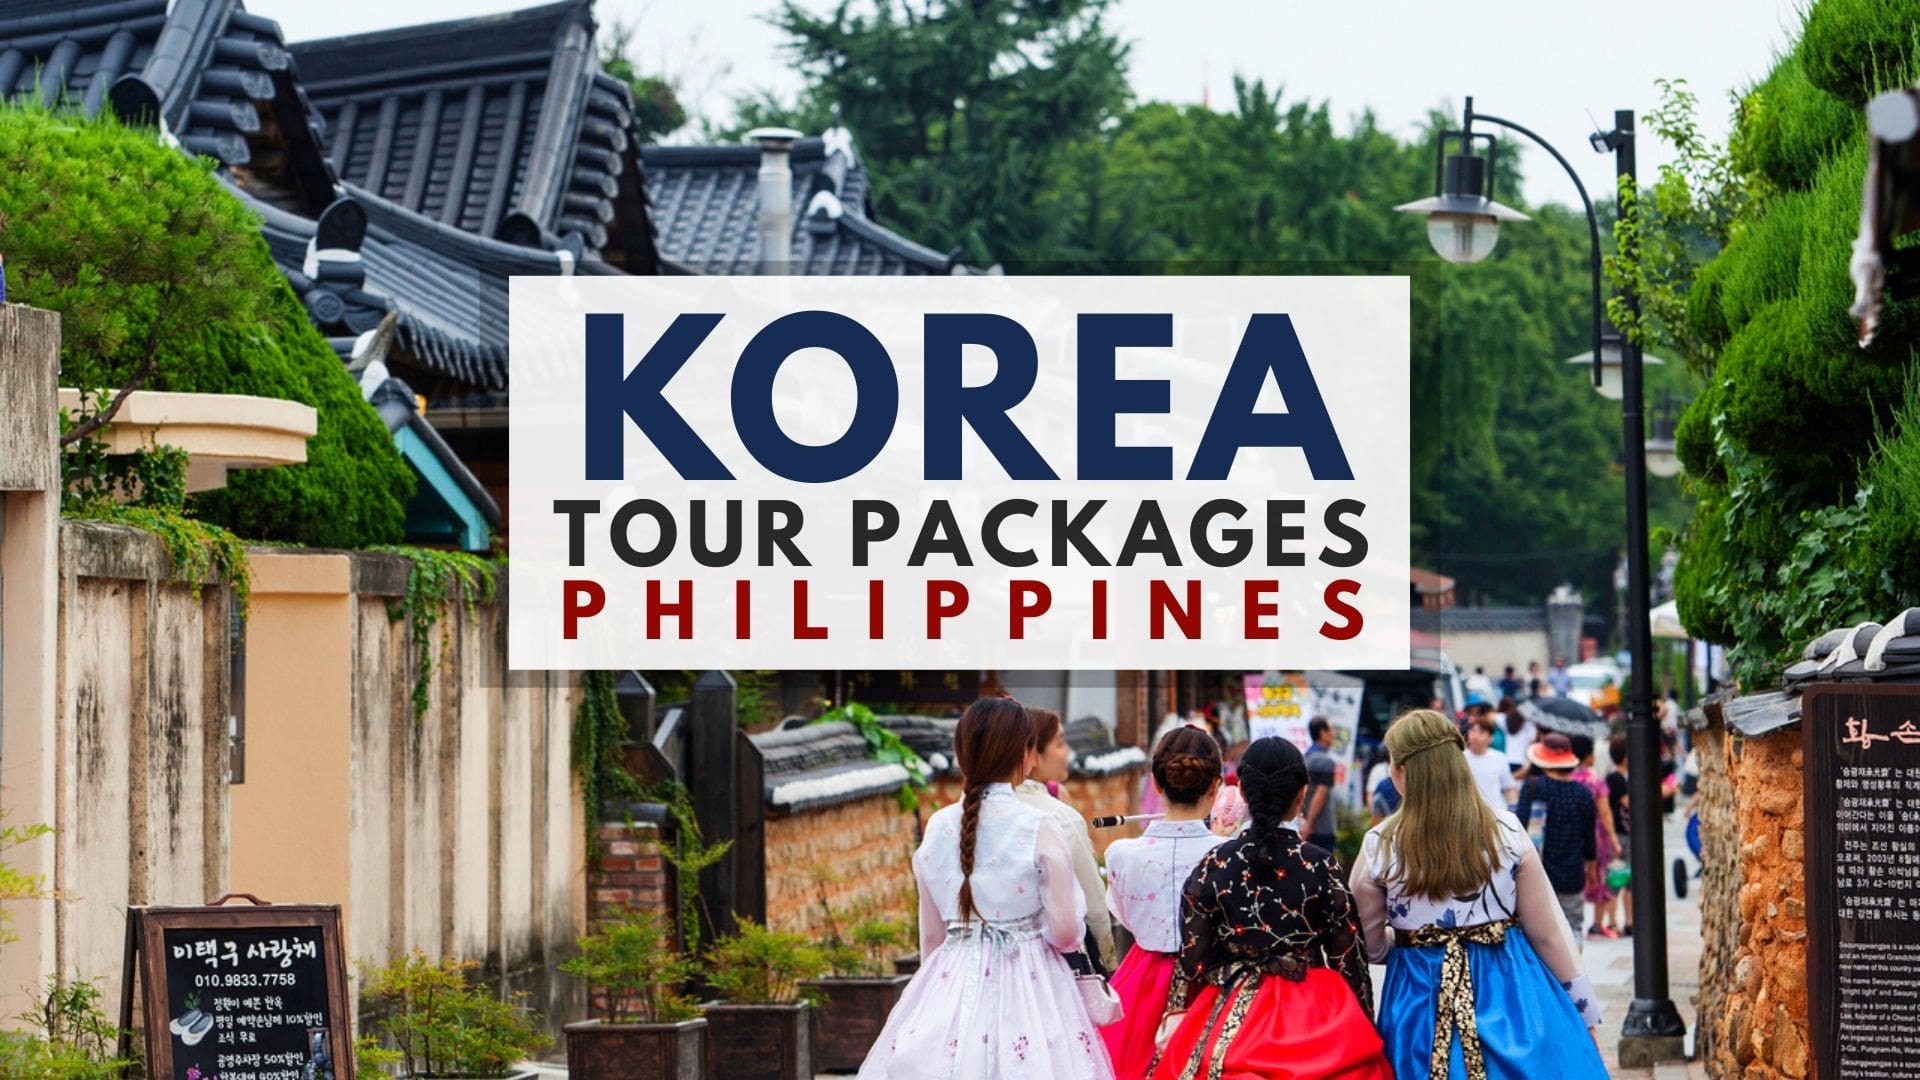 Korea Tour Package From Philippines 4 Days 3 Nights Regent Travel PH